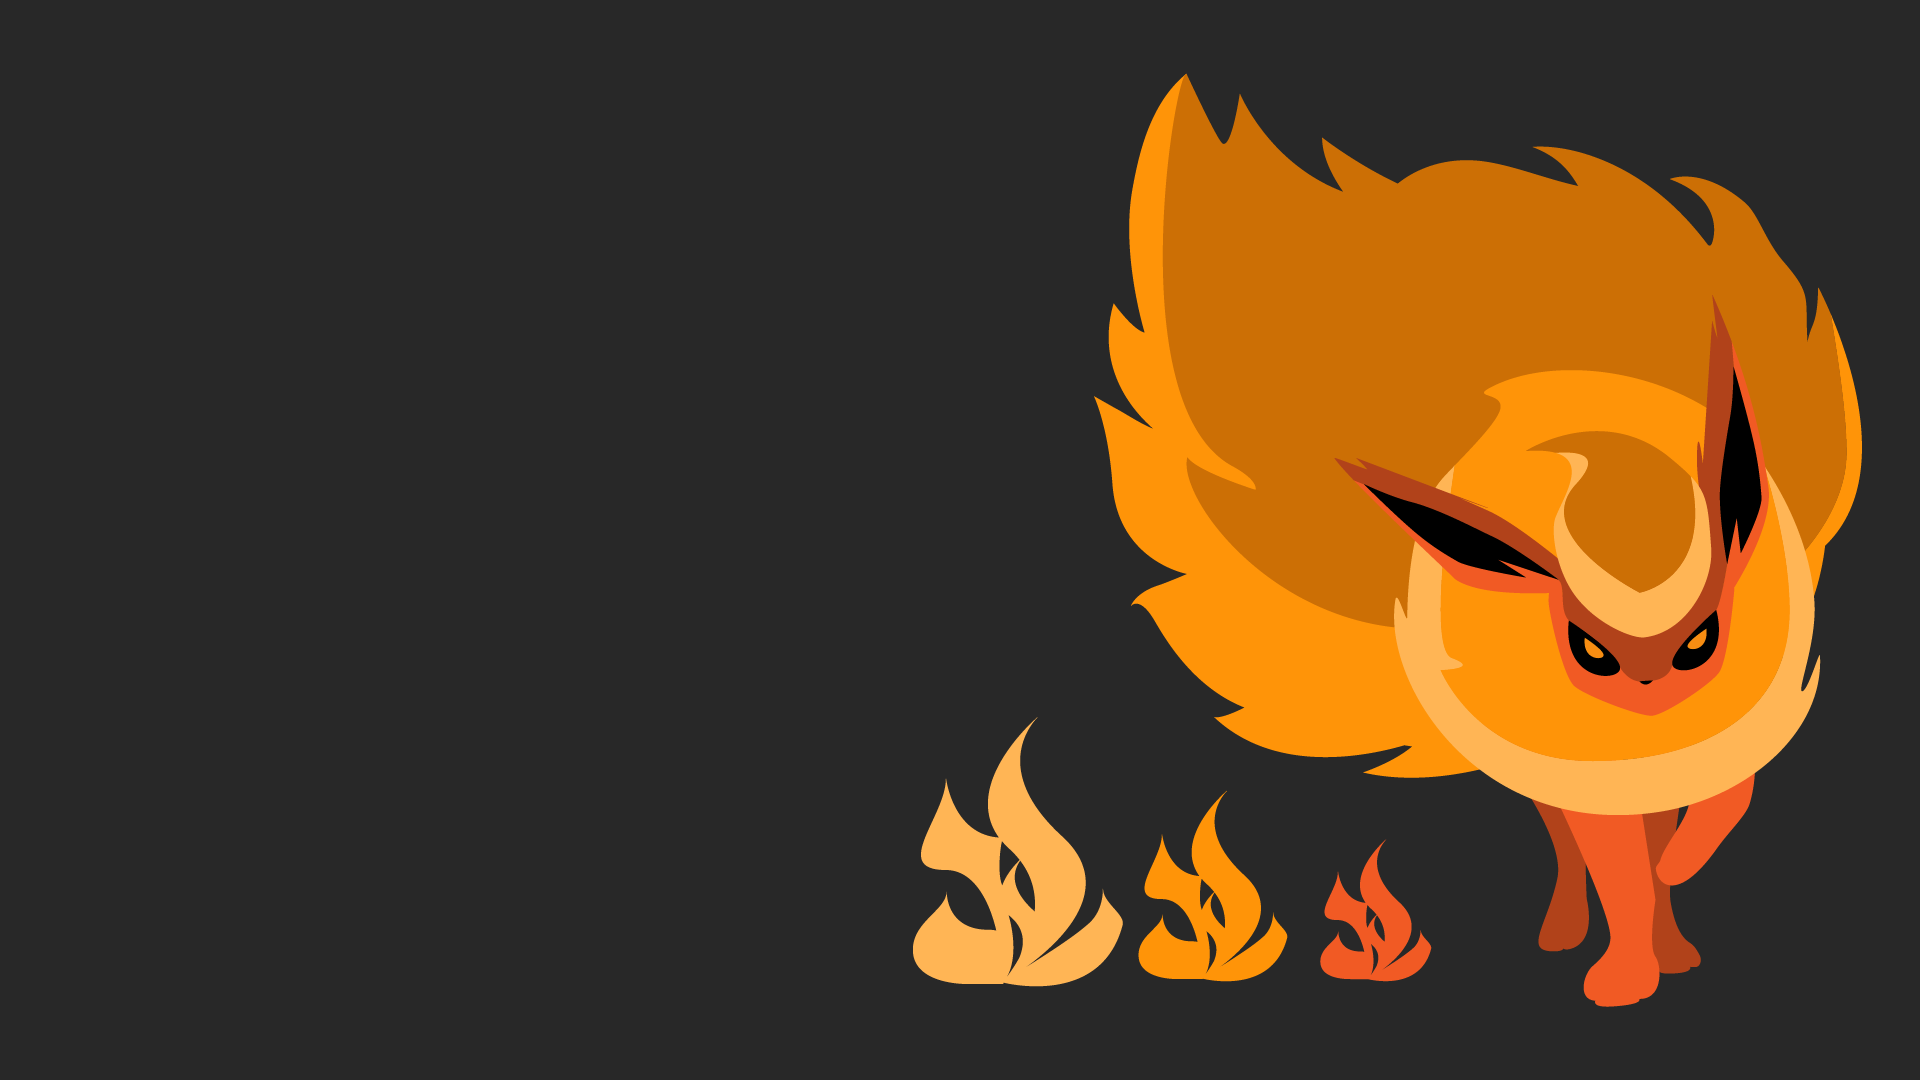 OC Flareon 1080p wallpaper (+shiny version in comments)